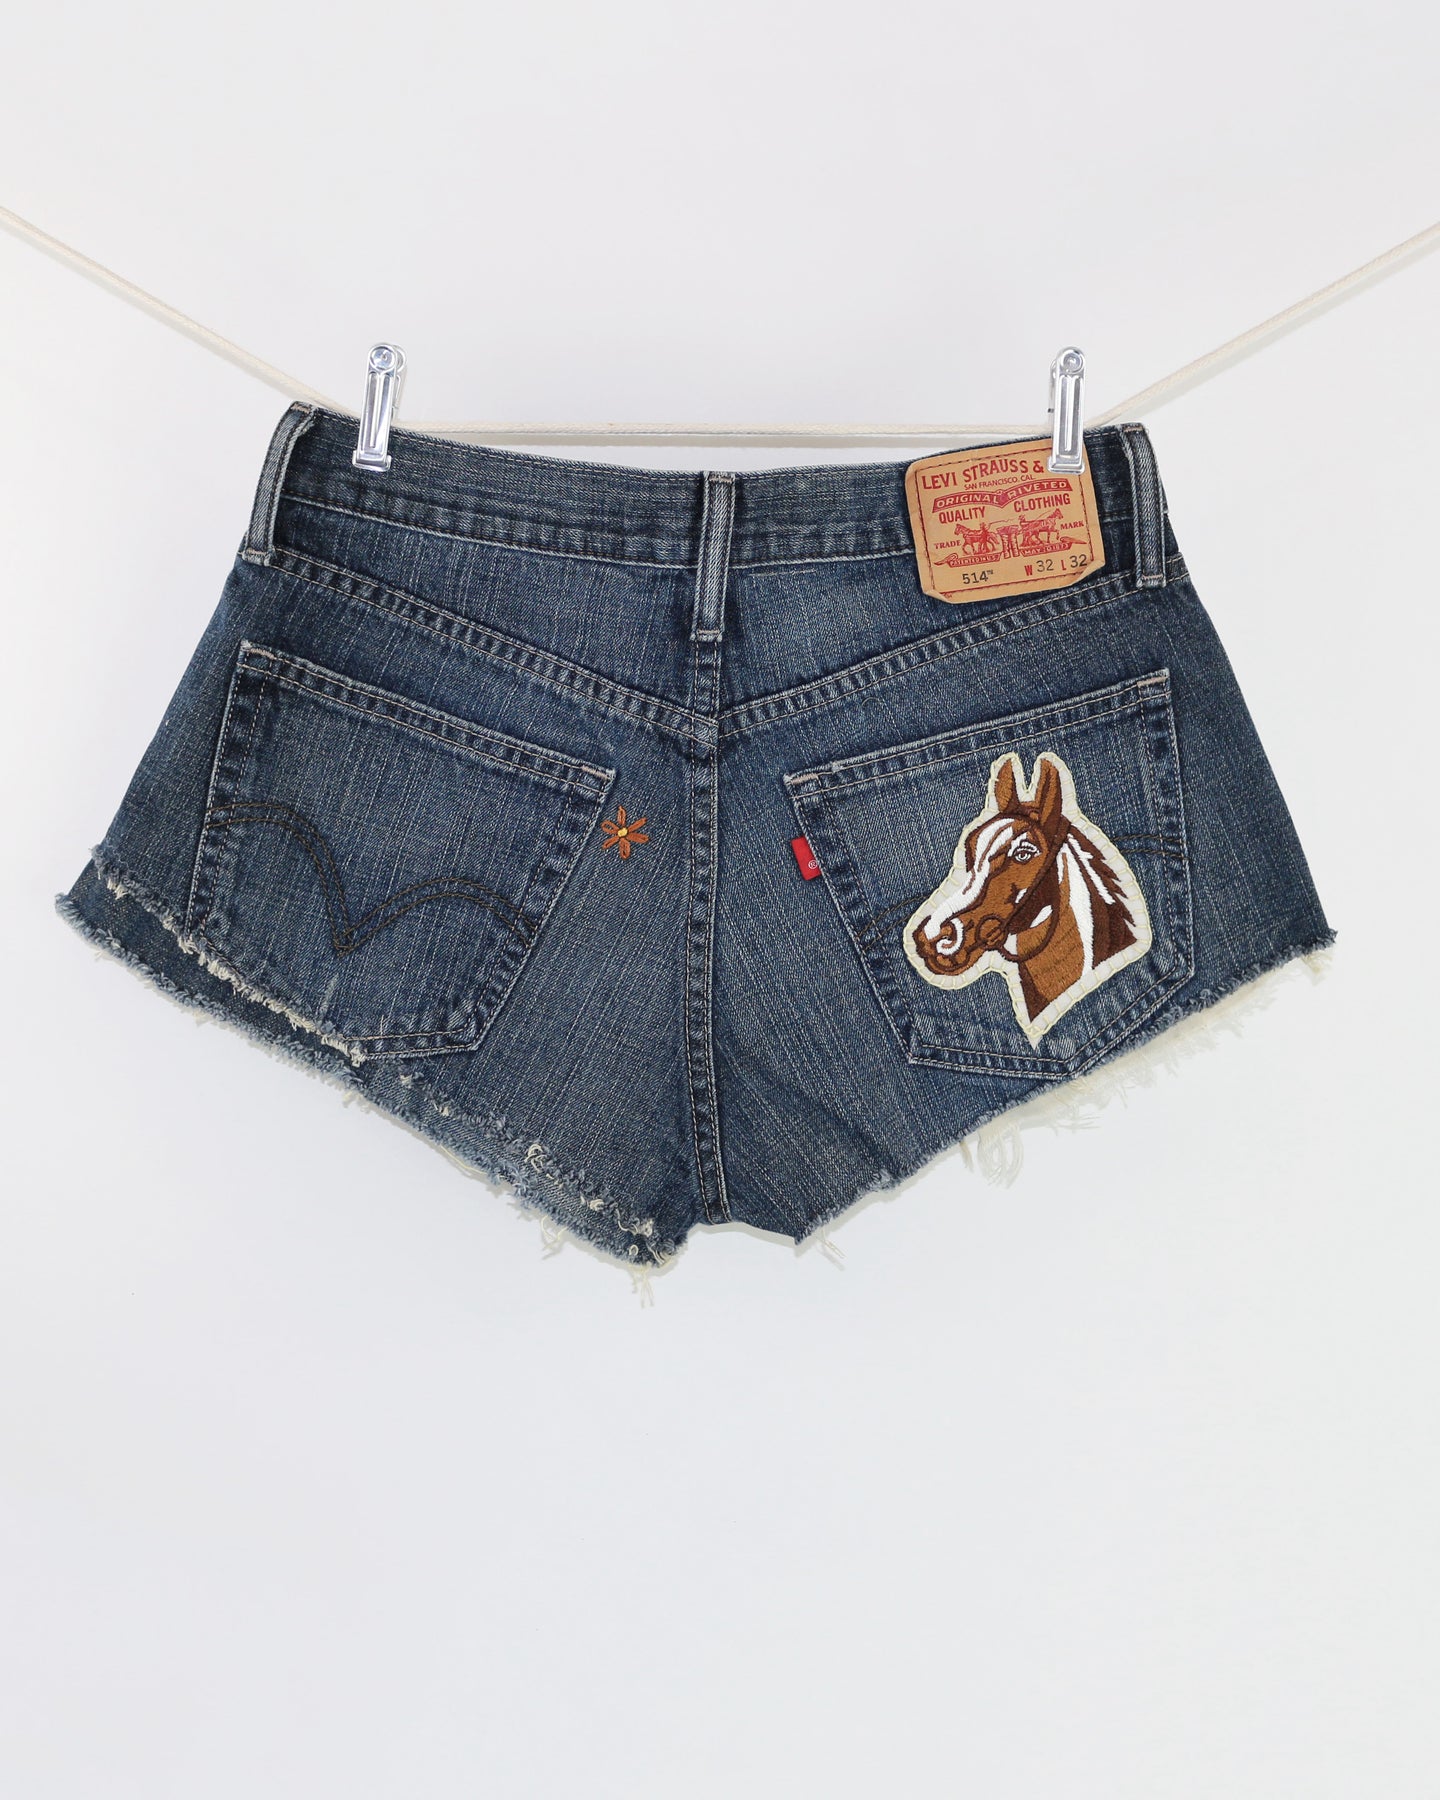 Daisy Duke Cutoff Short with Vintage patch, Size 30 & 31